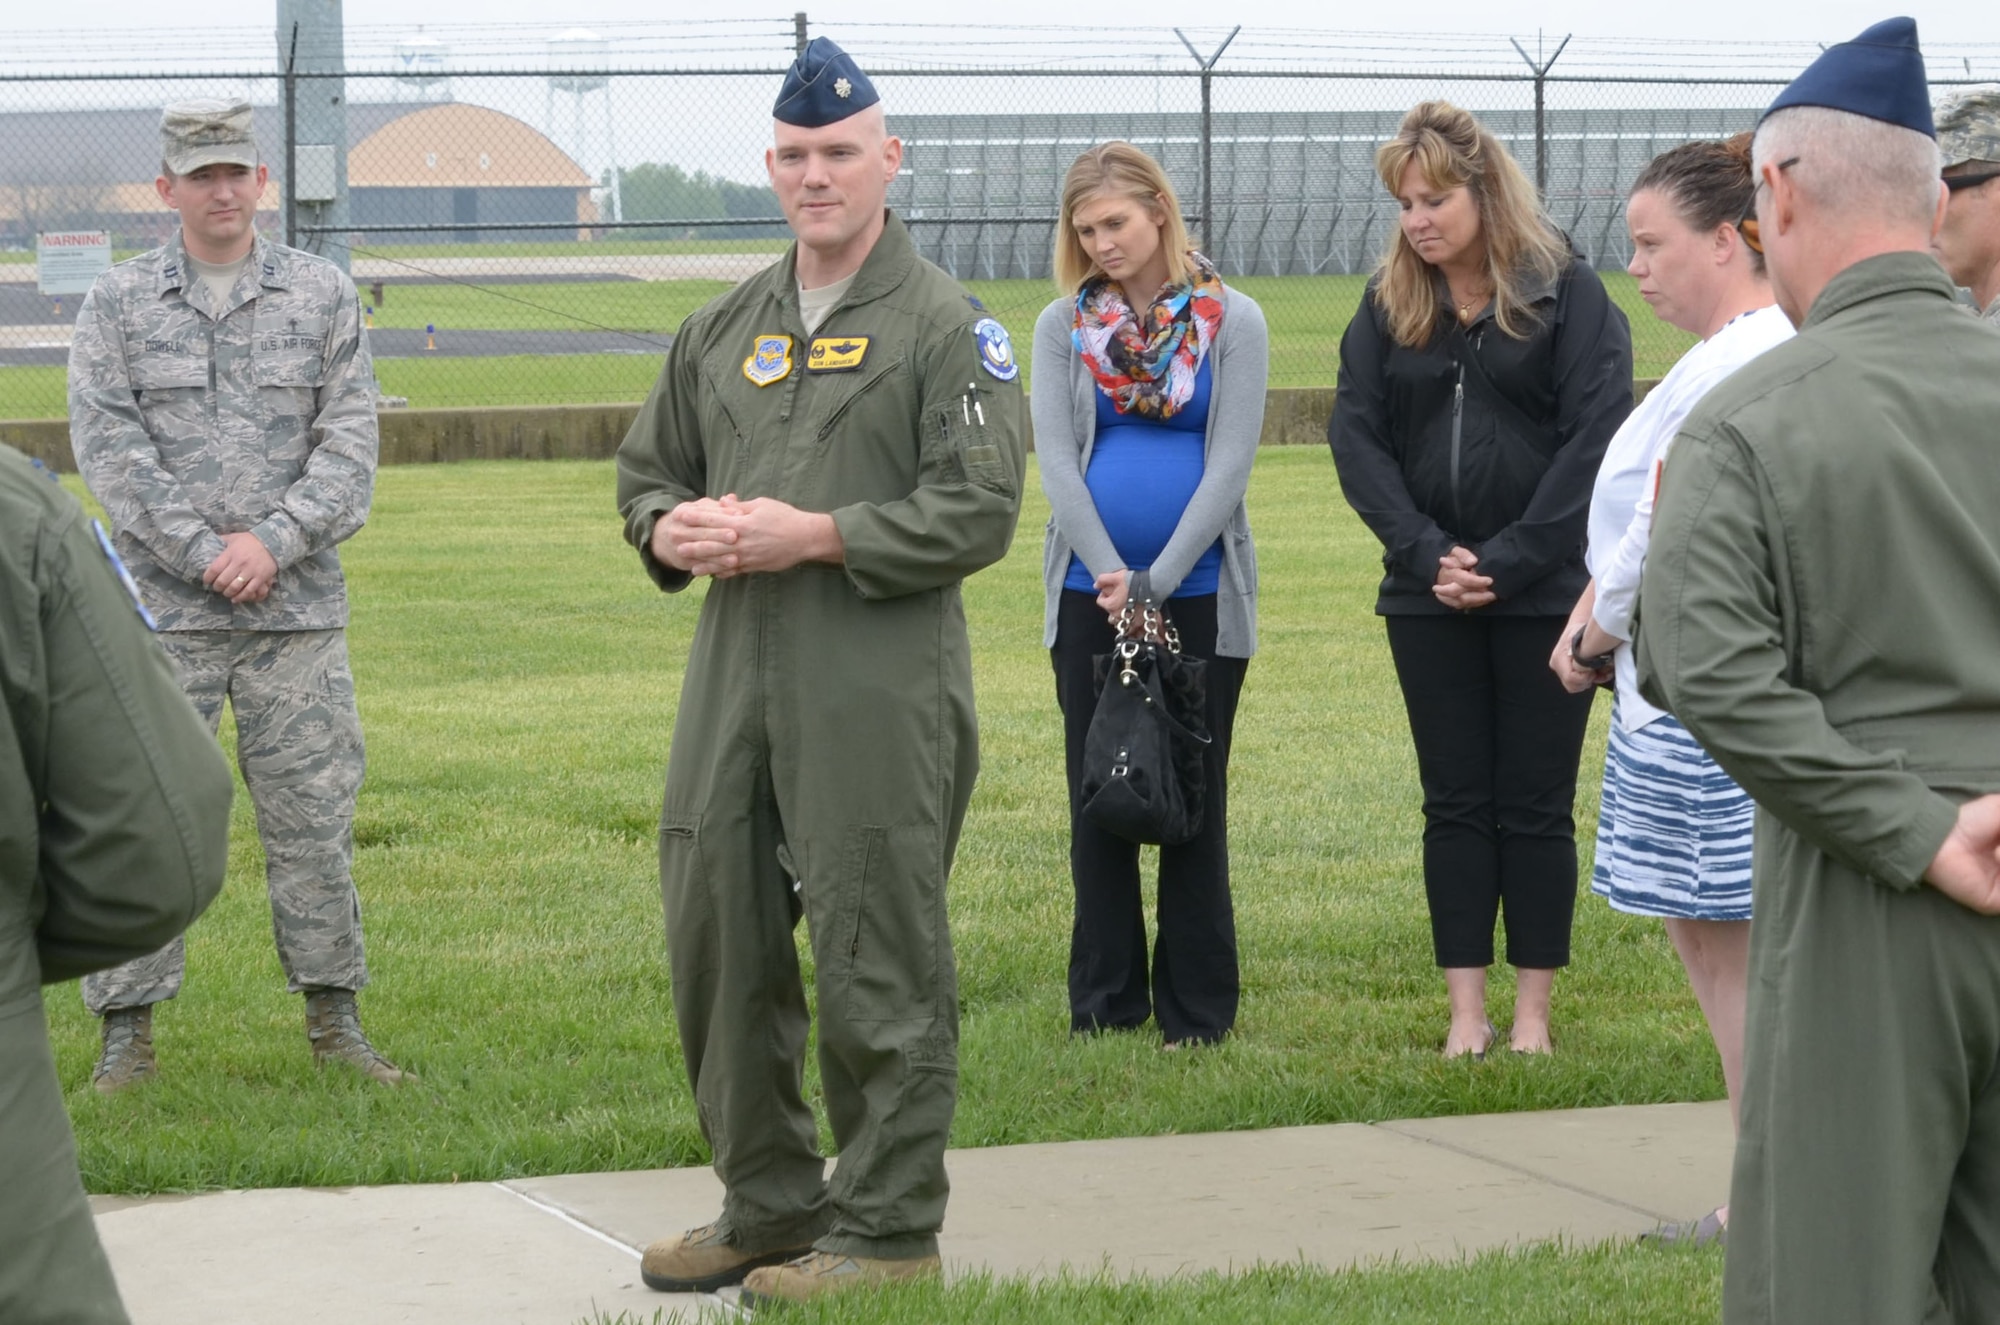 Air Force Lt. Col. Donald Landgrebe, commander of the 906th Air Refueling Squadron, hosts a memorial ceremony for Capt. Brandon Cyr April 27, 2016, at the 126th Air Refueling Wing, Scott AFB, Ill.  Cyr was a member of the 906 ARS when he was killed in a plane crash in Kandahar, Afghanistan, April 27, 2013. (National Guard photo by Staff Sgt. Andrew Kleiser)